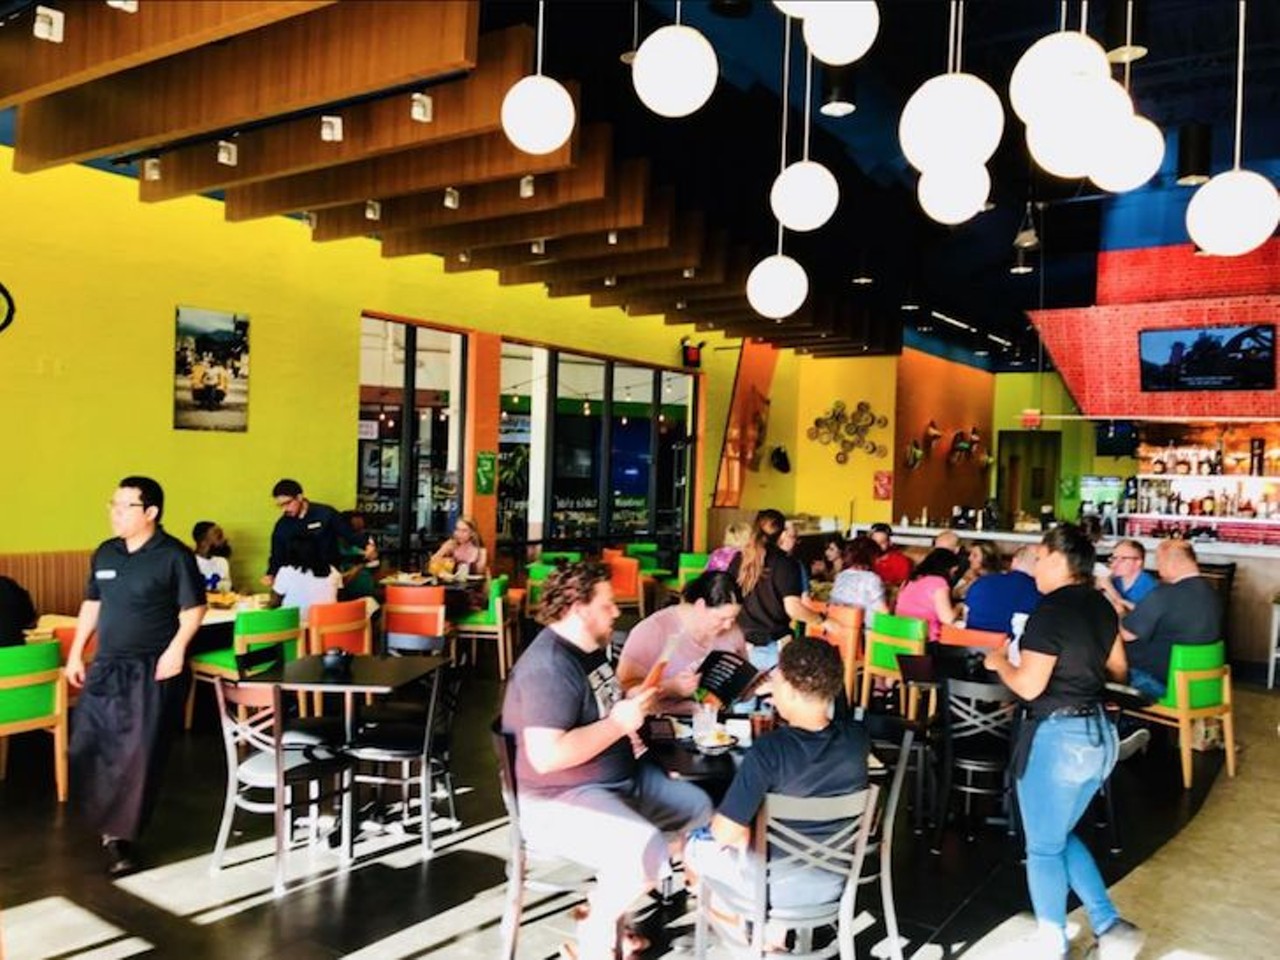 Pepe&#146;s Cantina Mexican Grill
5415 International Drive | (407) 317-6649
Experience all the flavors of Mexico right on I-Drive, where you can enjoy traditional Mexican food with the added bonus of tableside guacamole and handmade tortillas.
Photo via Pepes Cantina I-drive/Facebook